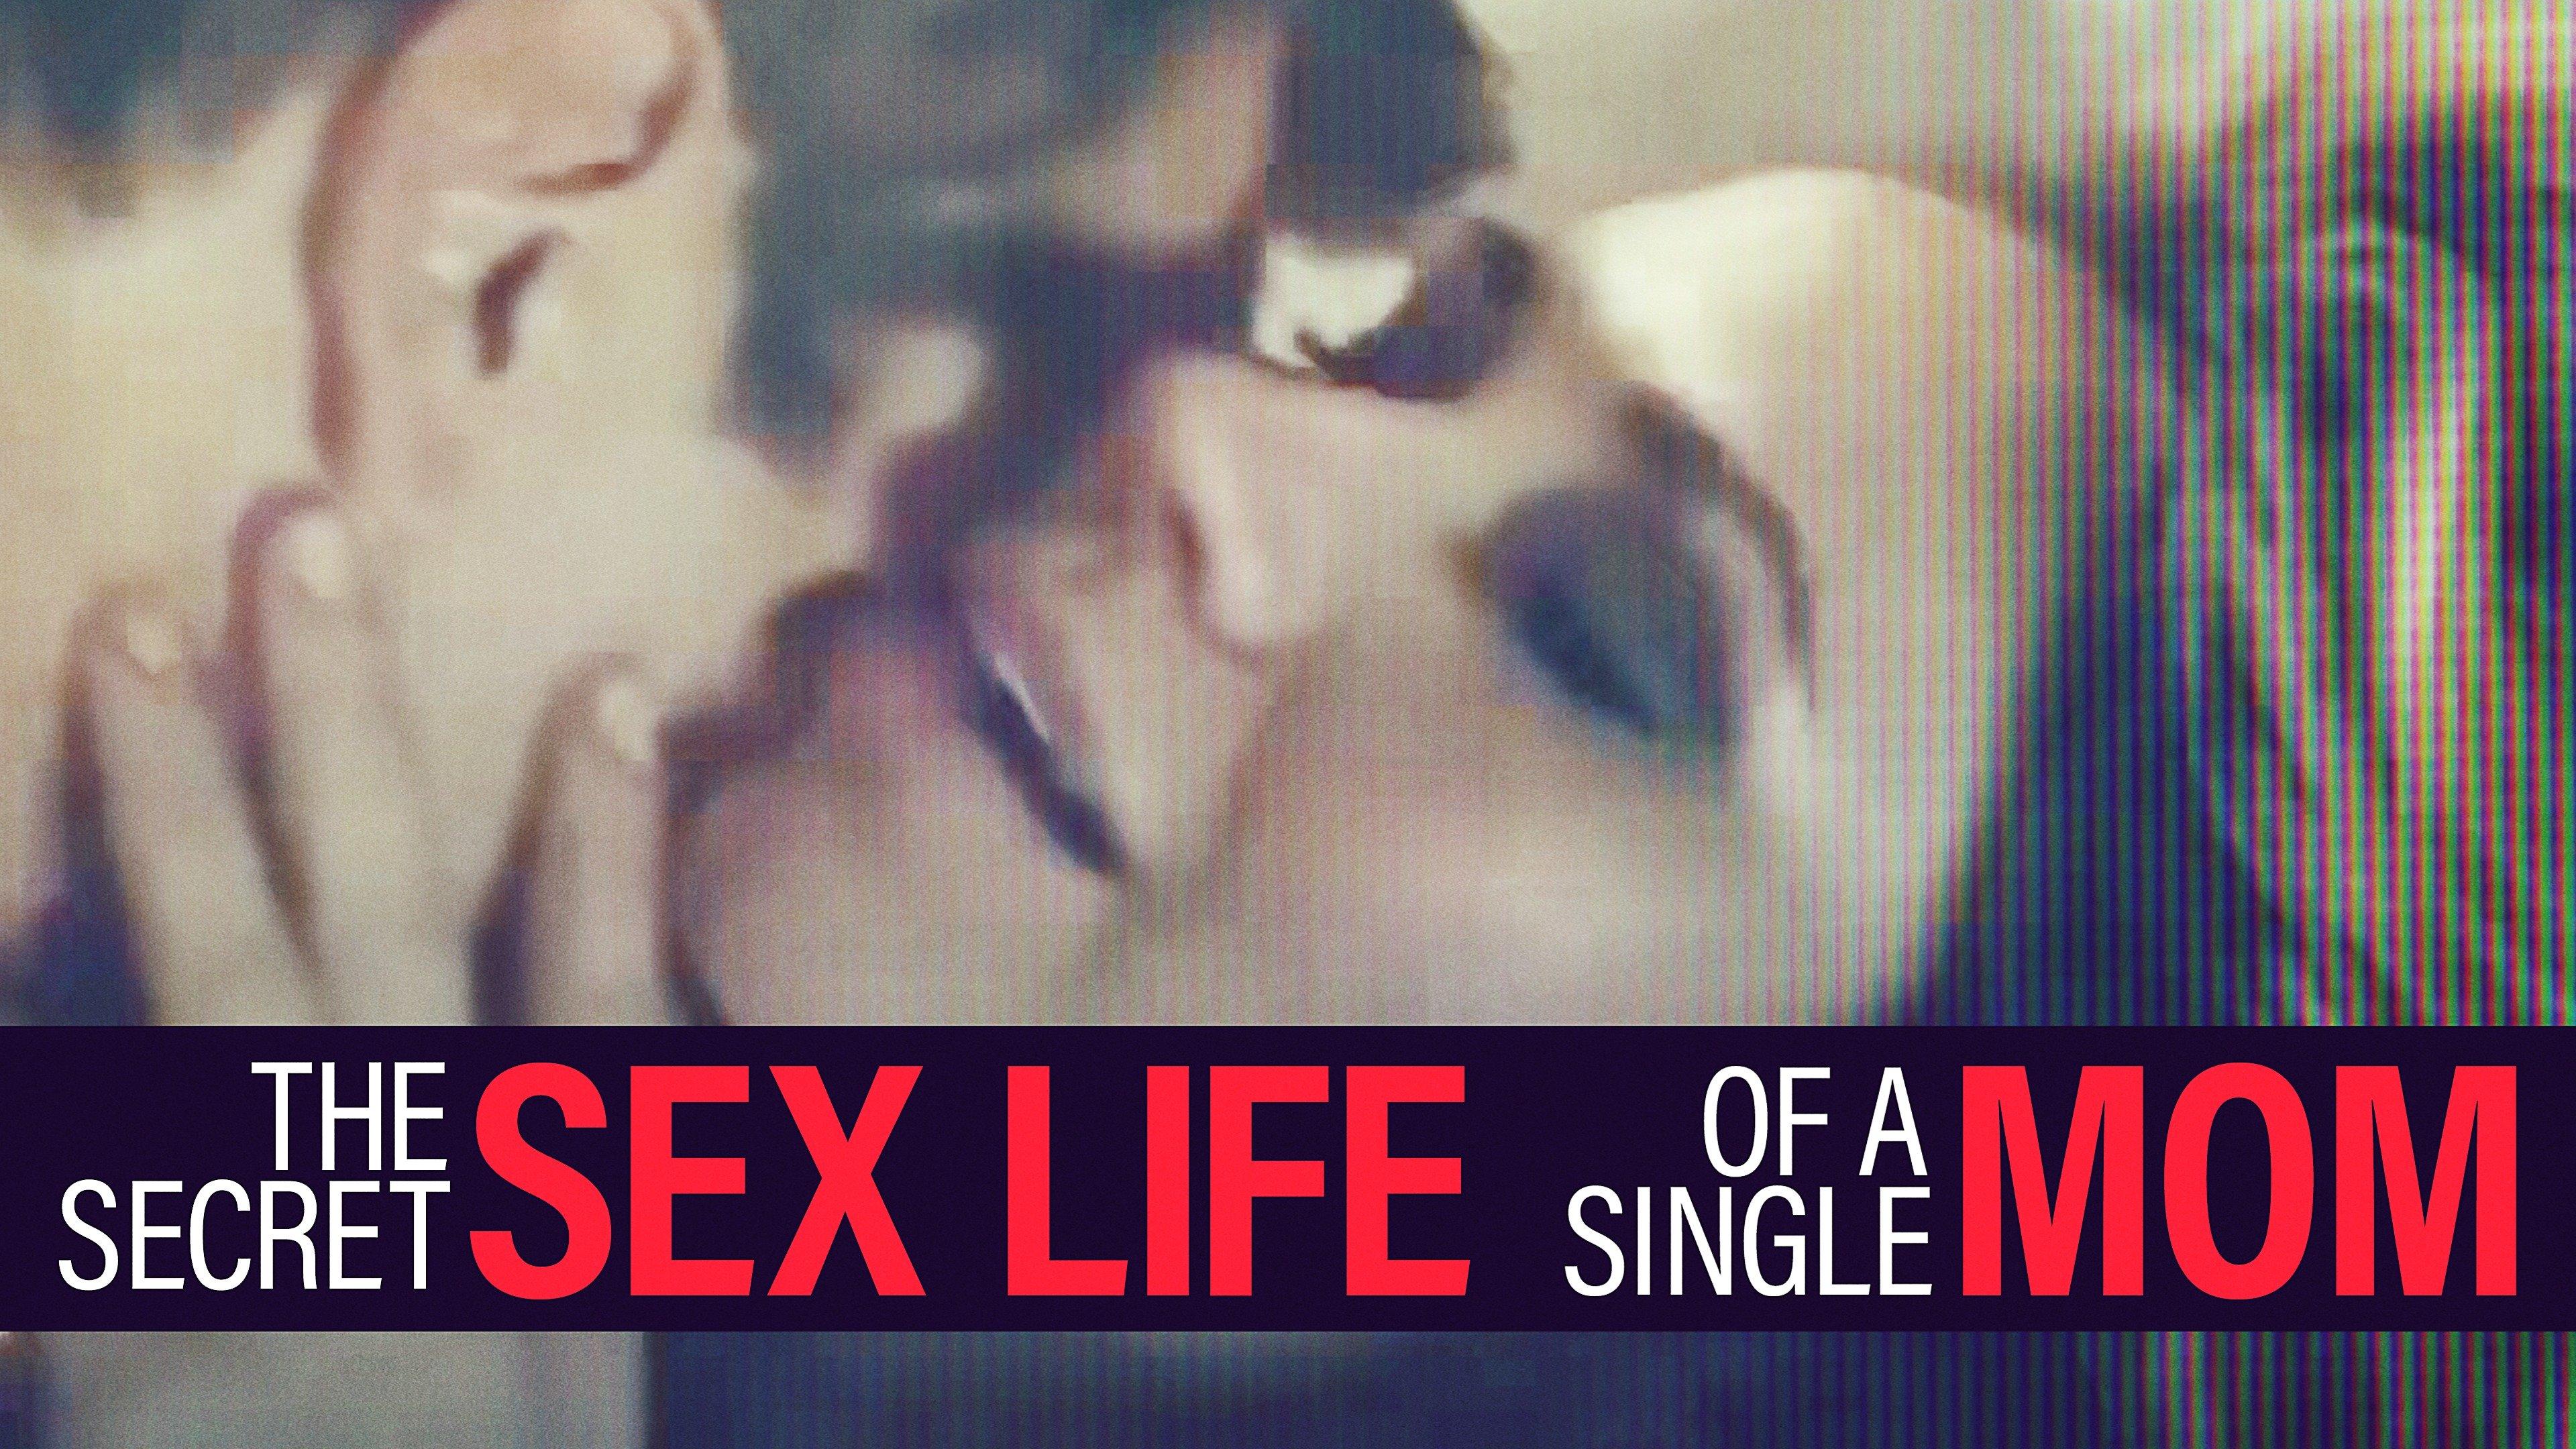 Watch The Secret Sex Life of a Single Mom Streaming Online on Philo (Free Trial)